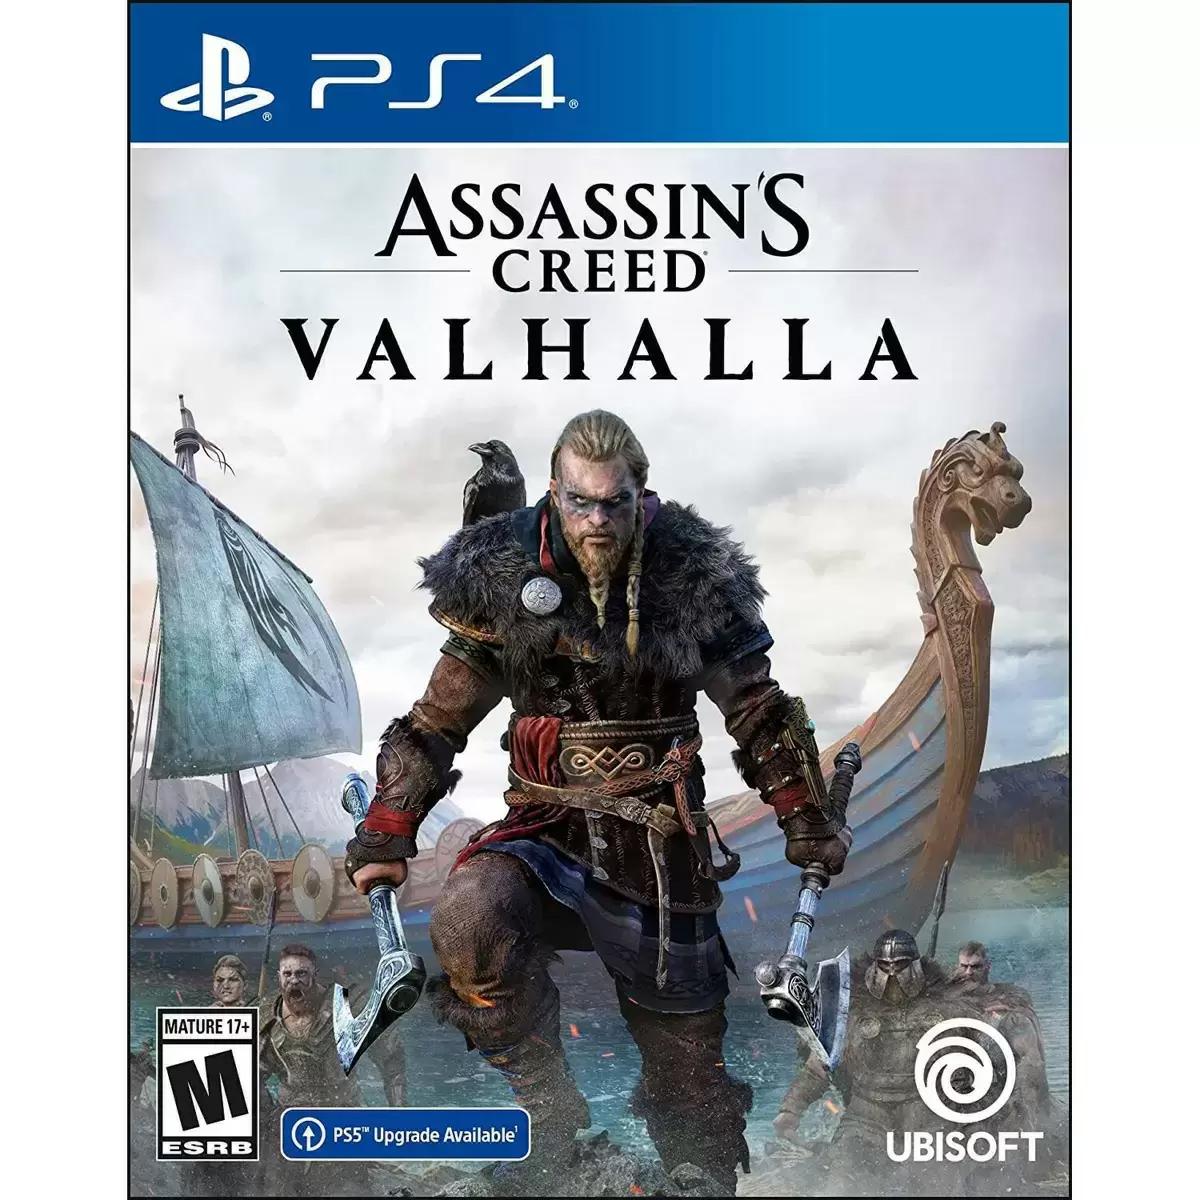 Assassins Creed Valhalla PS4 or Xbox for $27.99 Shipped